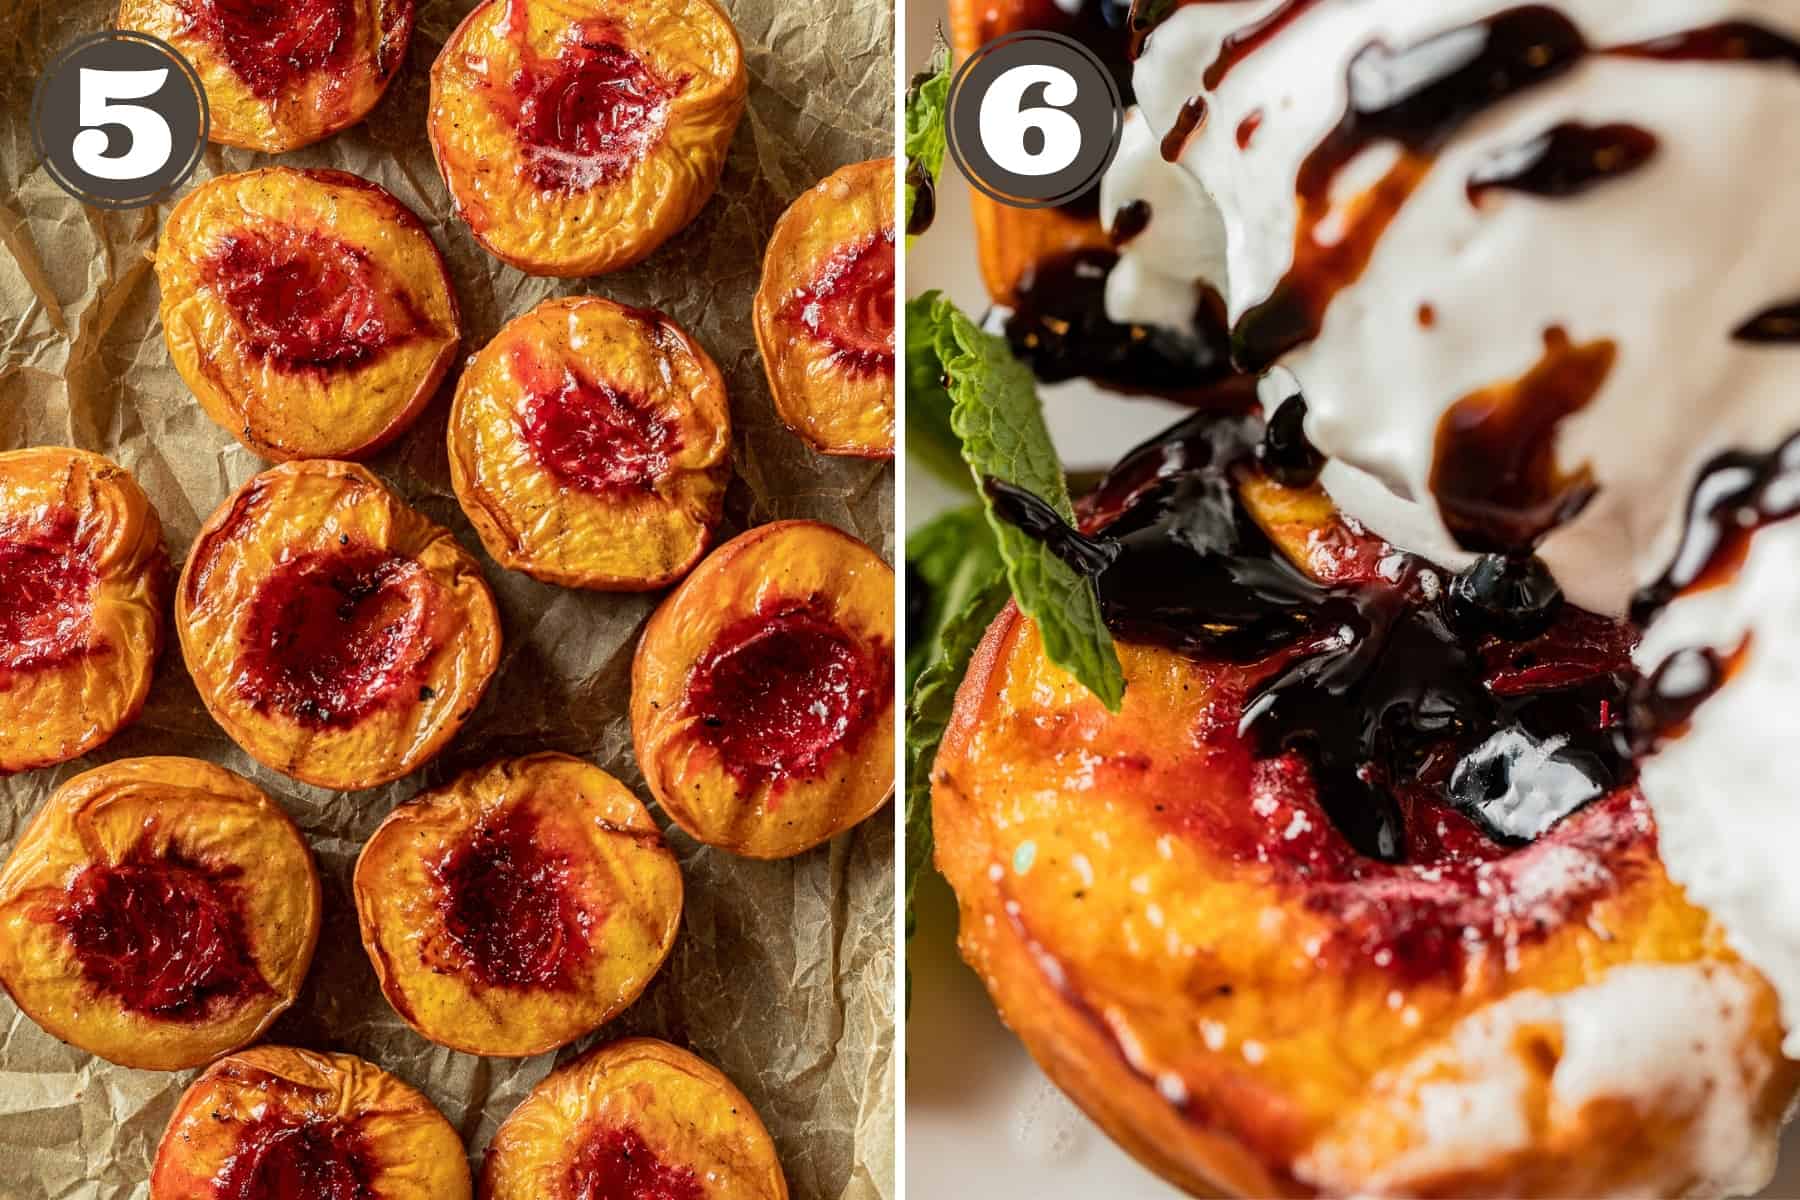 Side by side photos of smoked peaches with grill marks on parchment paper and peaches topped with vanilla ice cream and balsamic glaze.